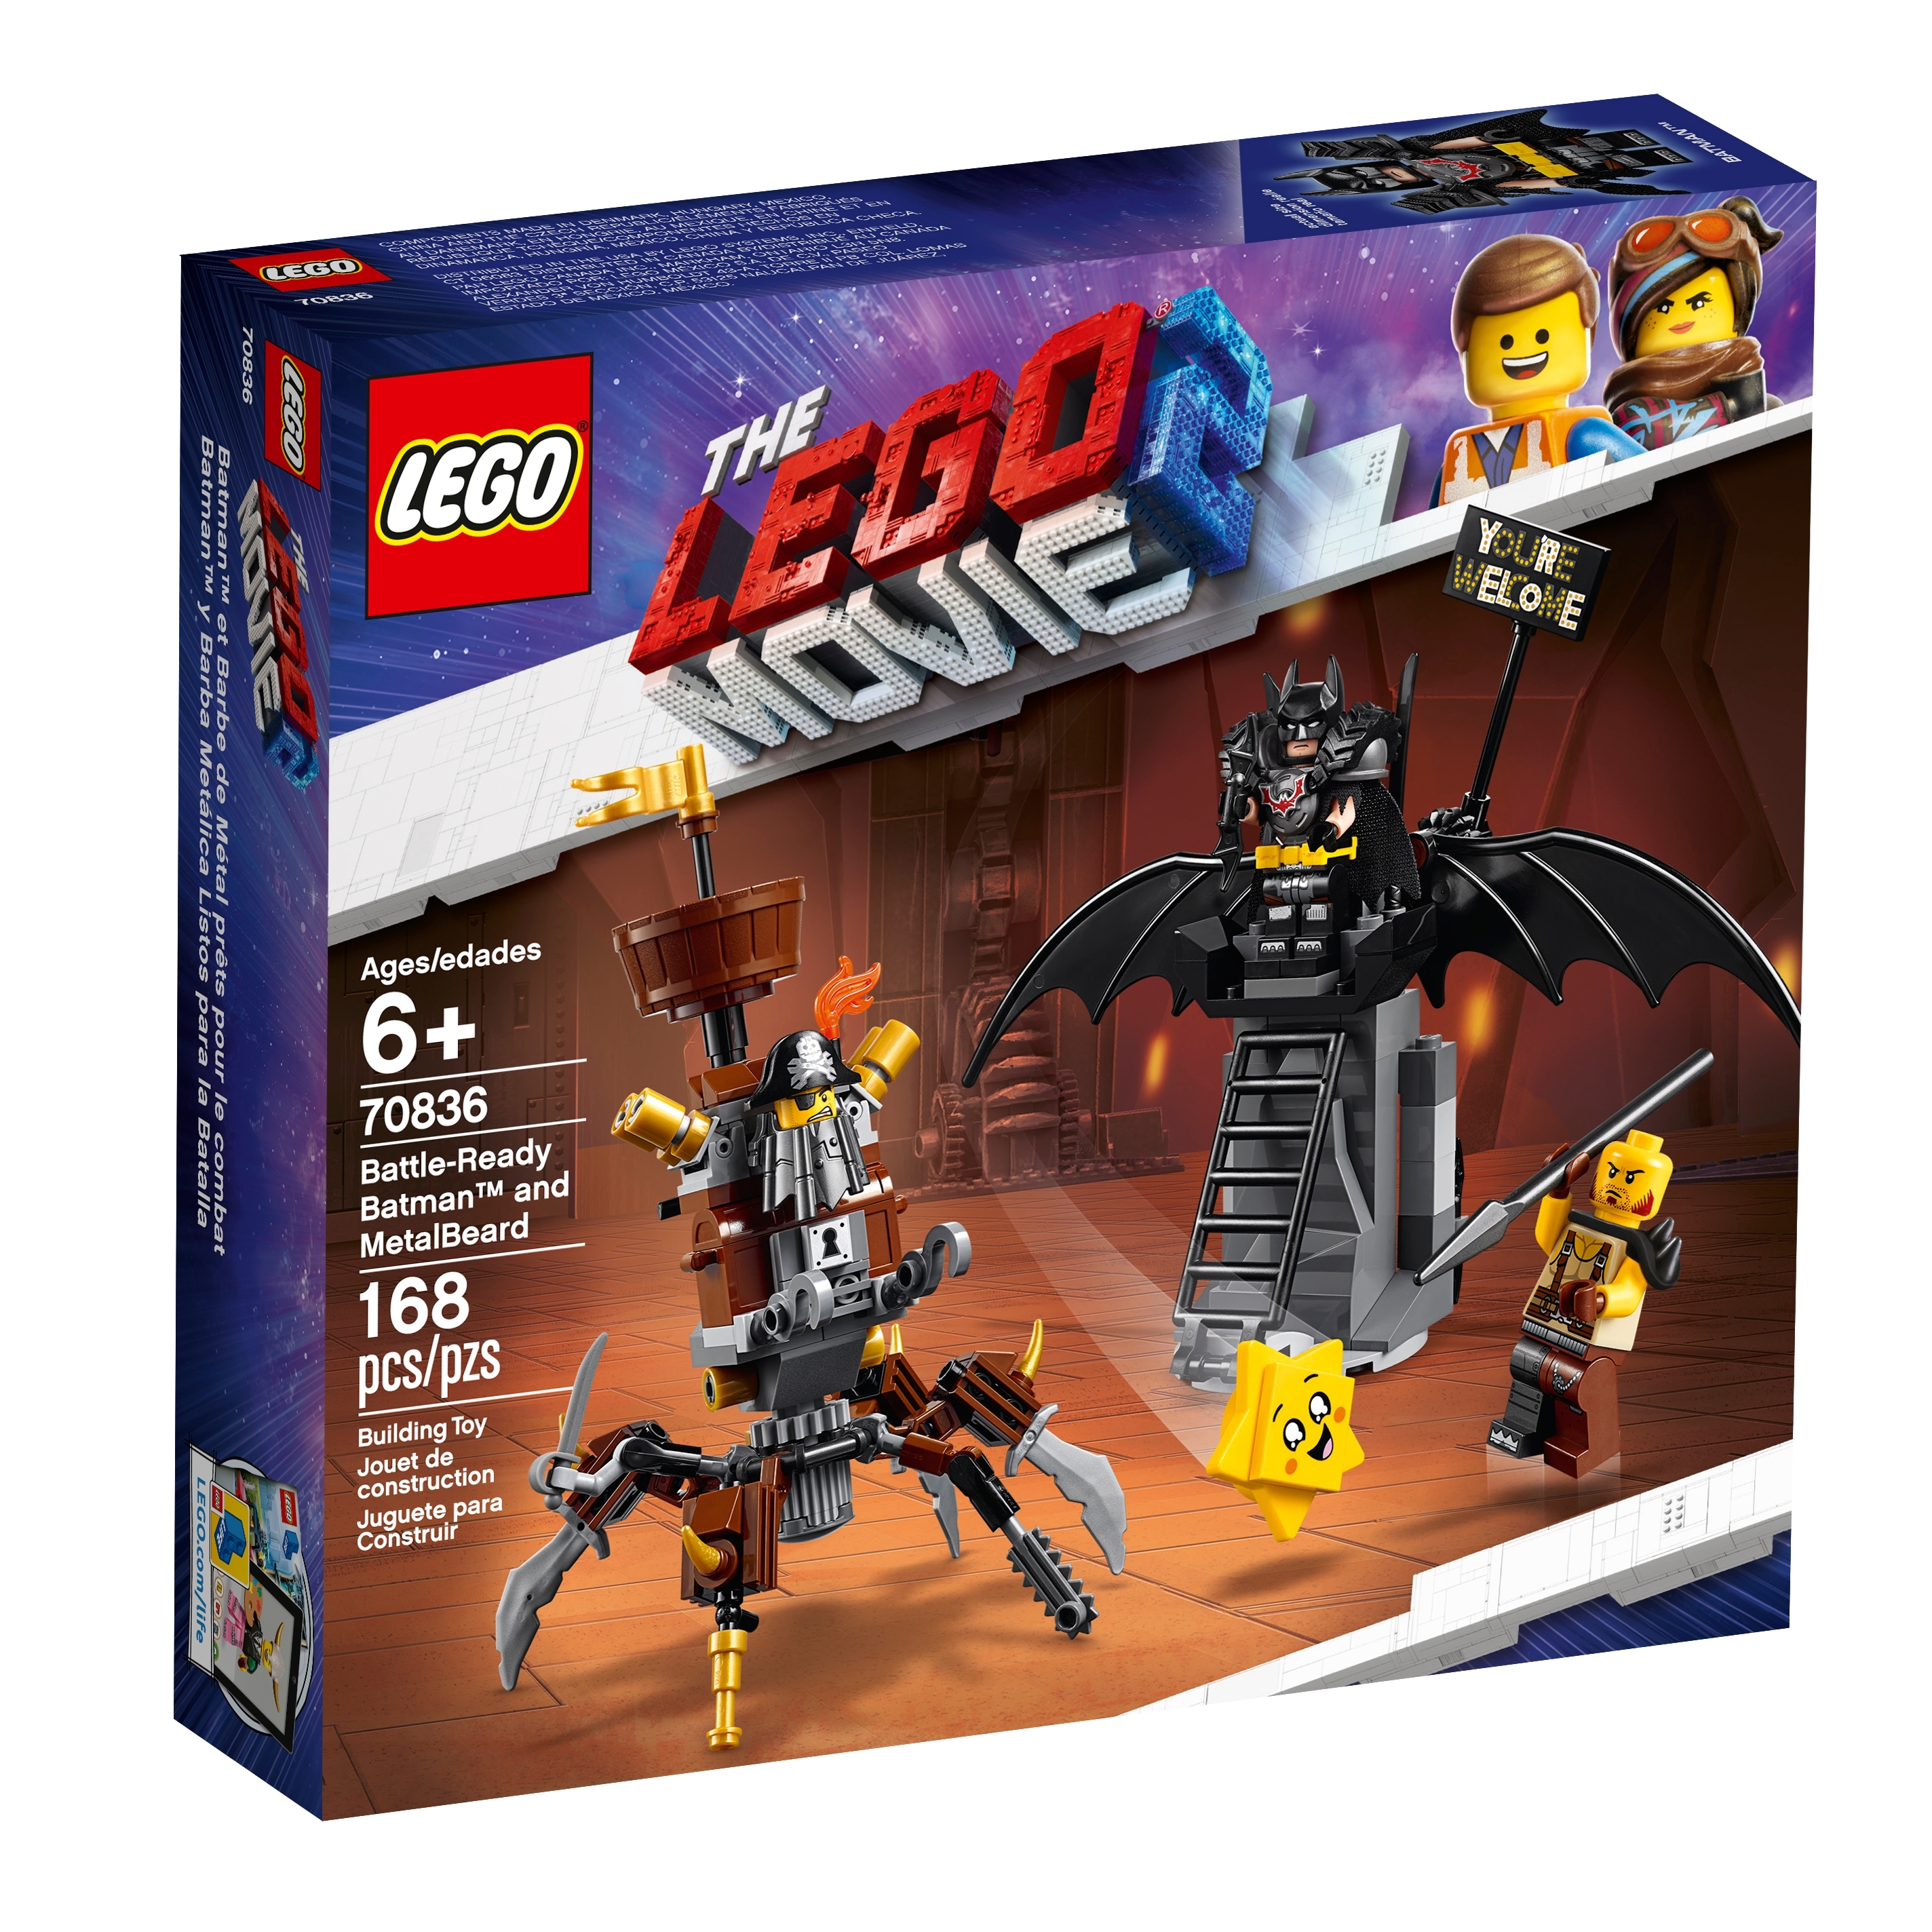 LEGO The Batman Movie Sets Reported for 2022 - The Brick Fan